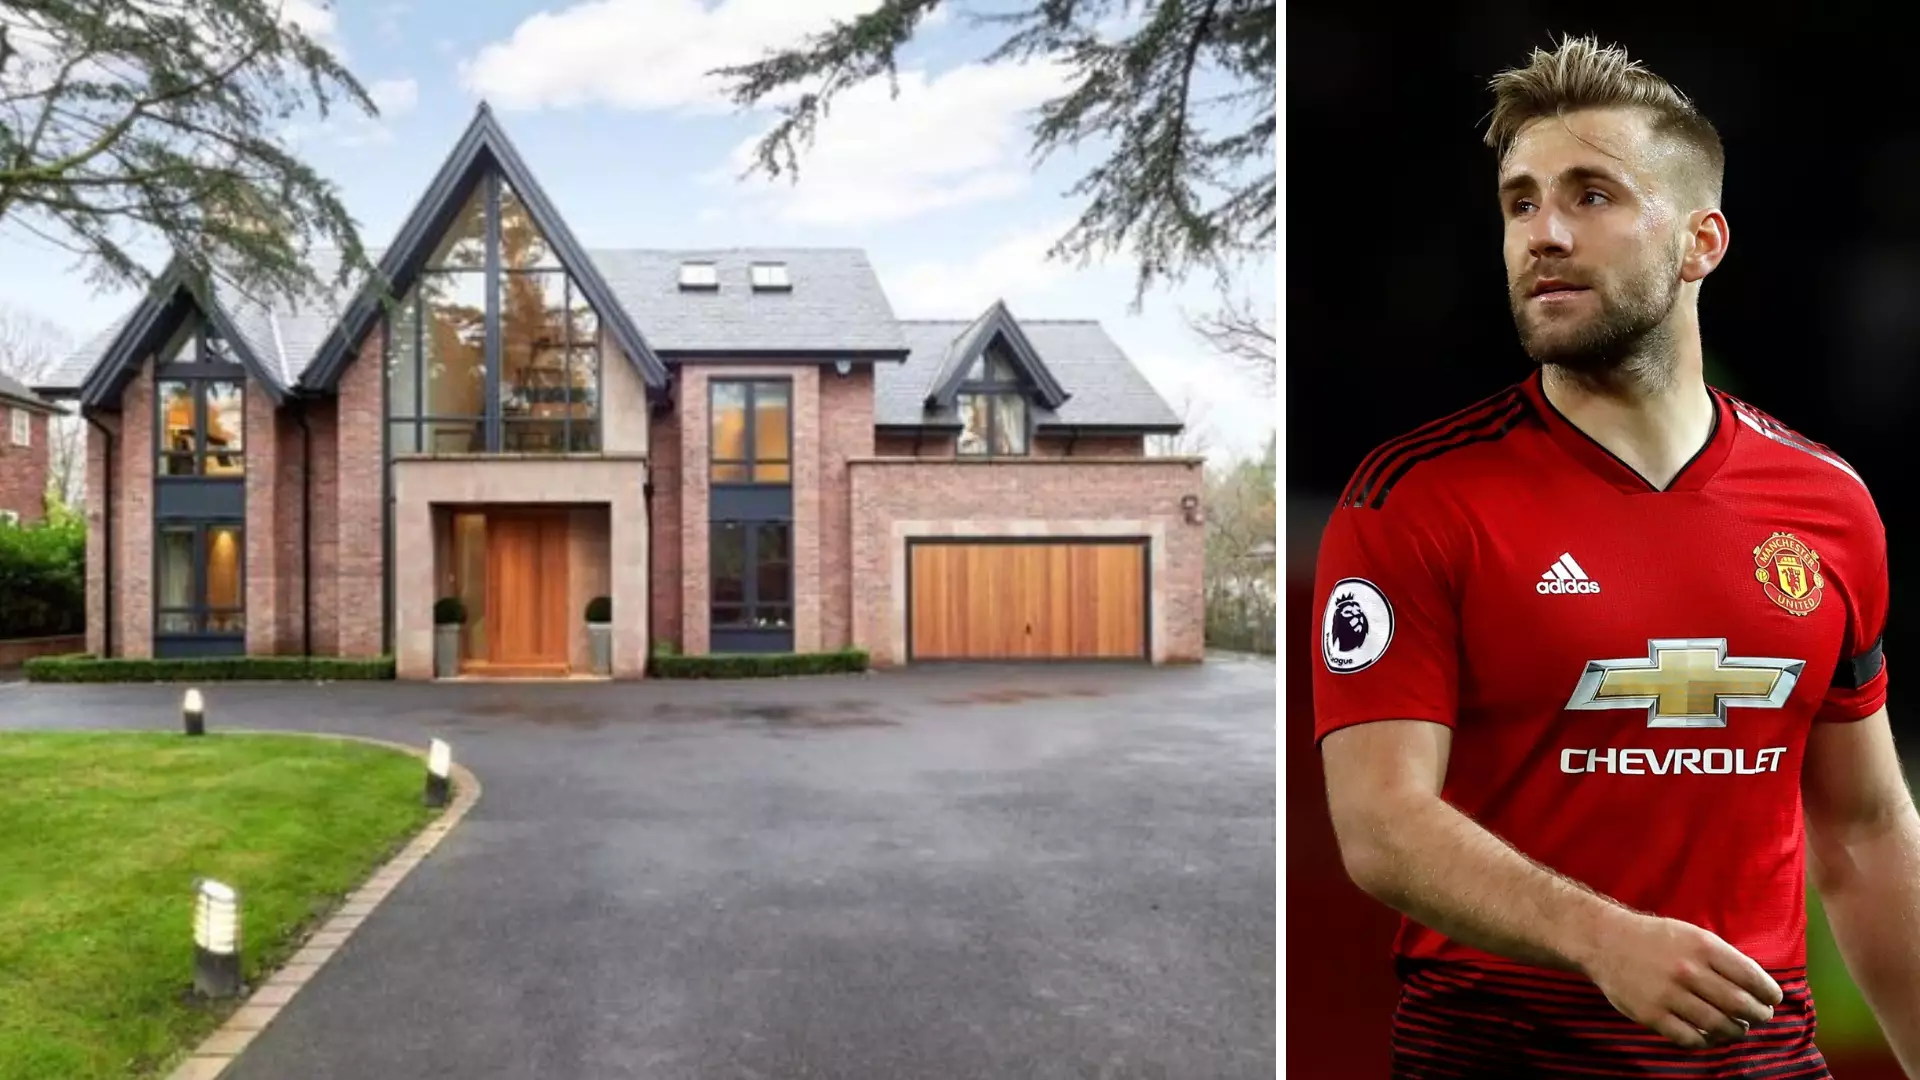 Take A Look Inside Luke Shaw’s Incredible Mansion, It Costs £2.8m To Buy